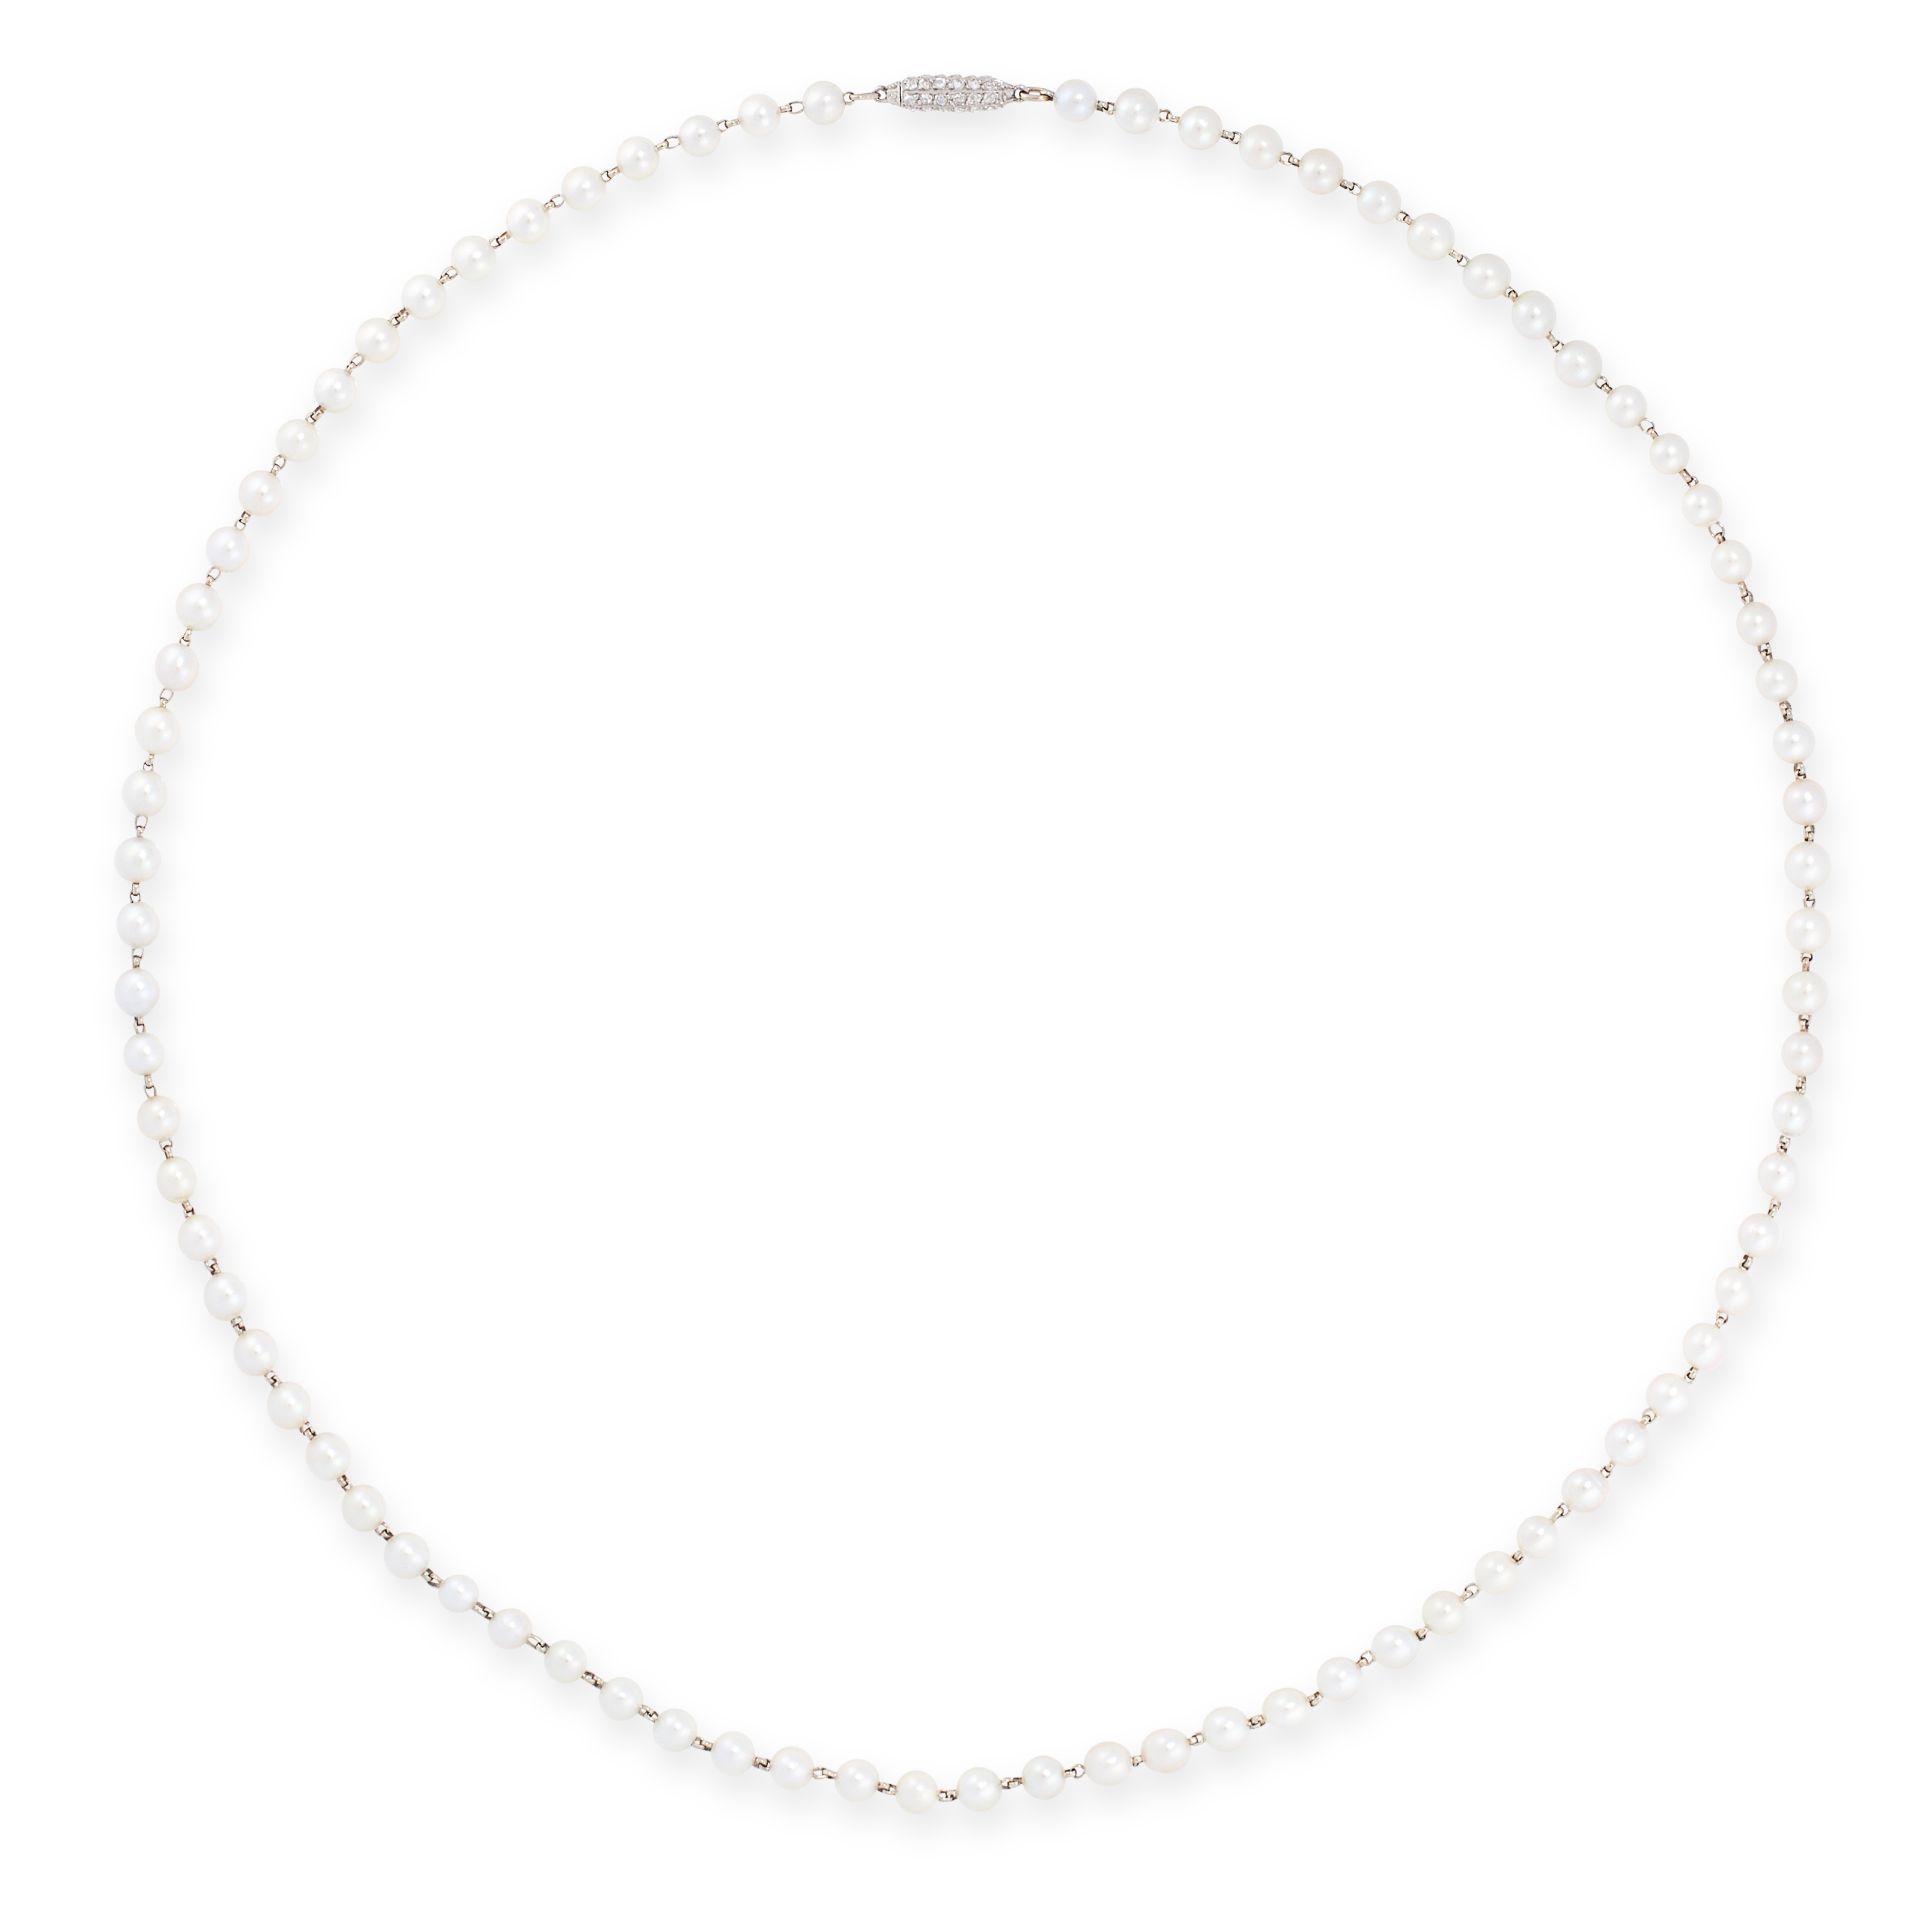 PEARL AND DIAMOND NECKLACE designed as a single row of pearls measuring 4.8mm diameter, threaded